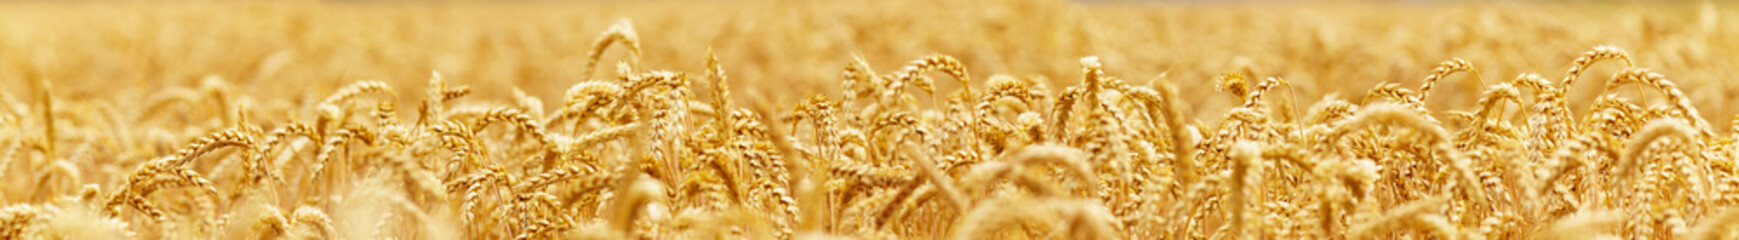 Gold wheat field, crops field. Selective focus